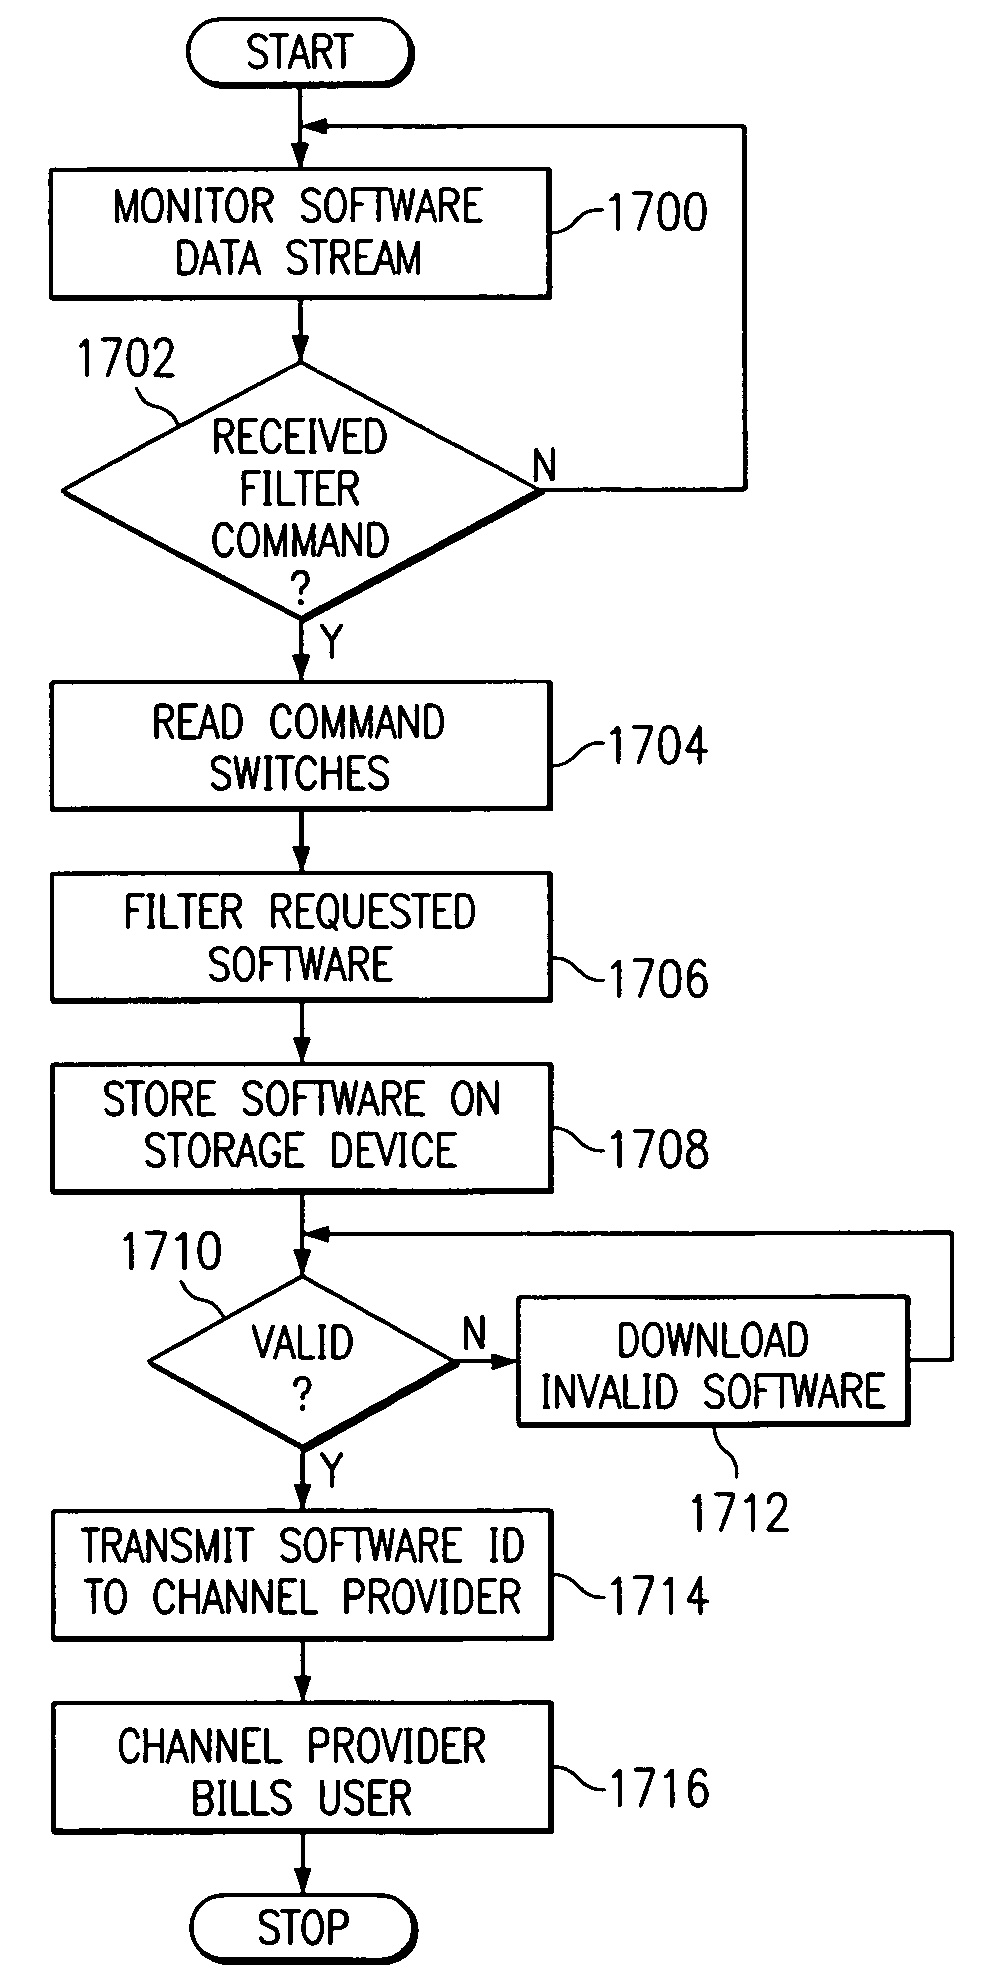 Software downloading using a television broadcast channel